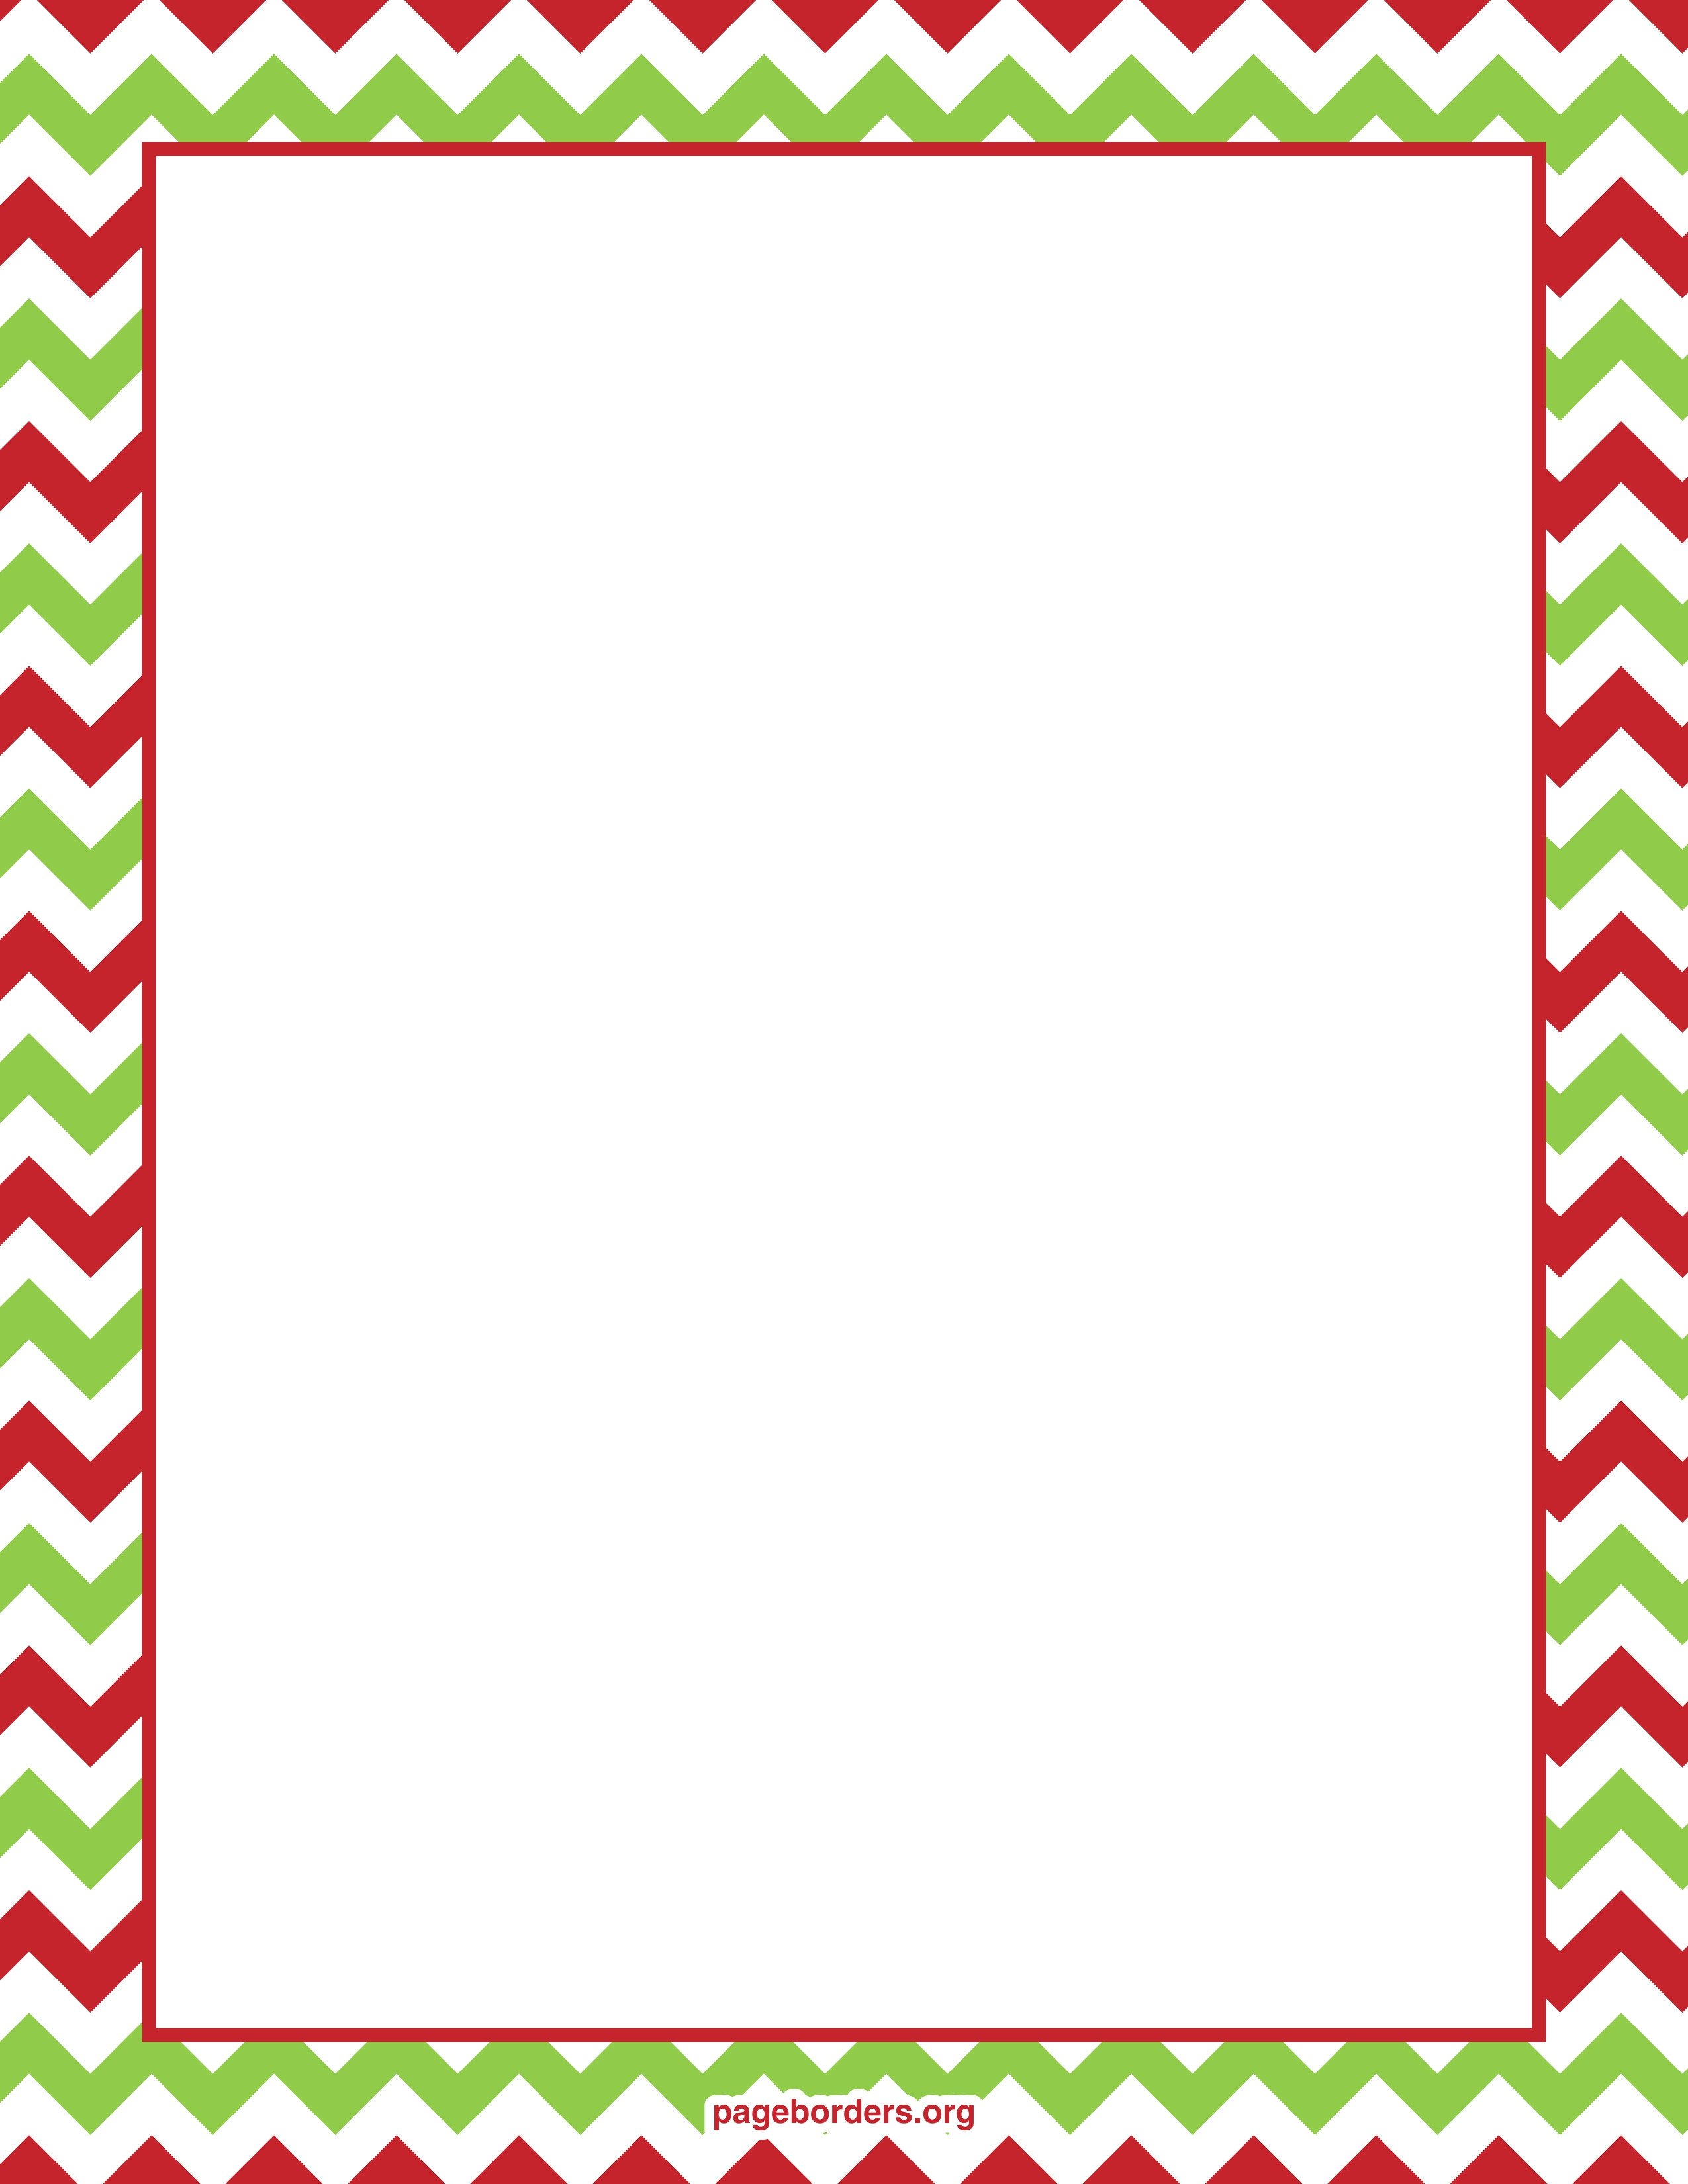 Free Printable Cliparts Borders, Download Free Clip Art, Free Clip - Free Printable Clip Art Borders